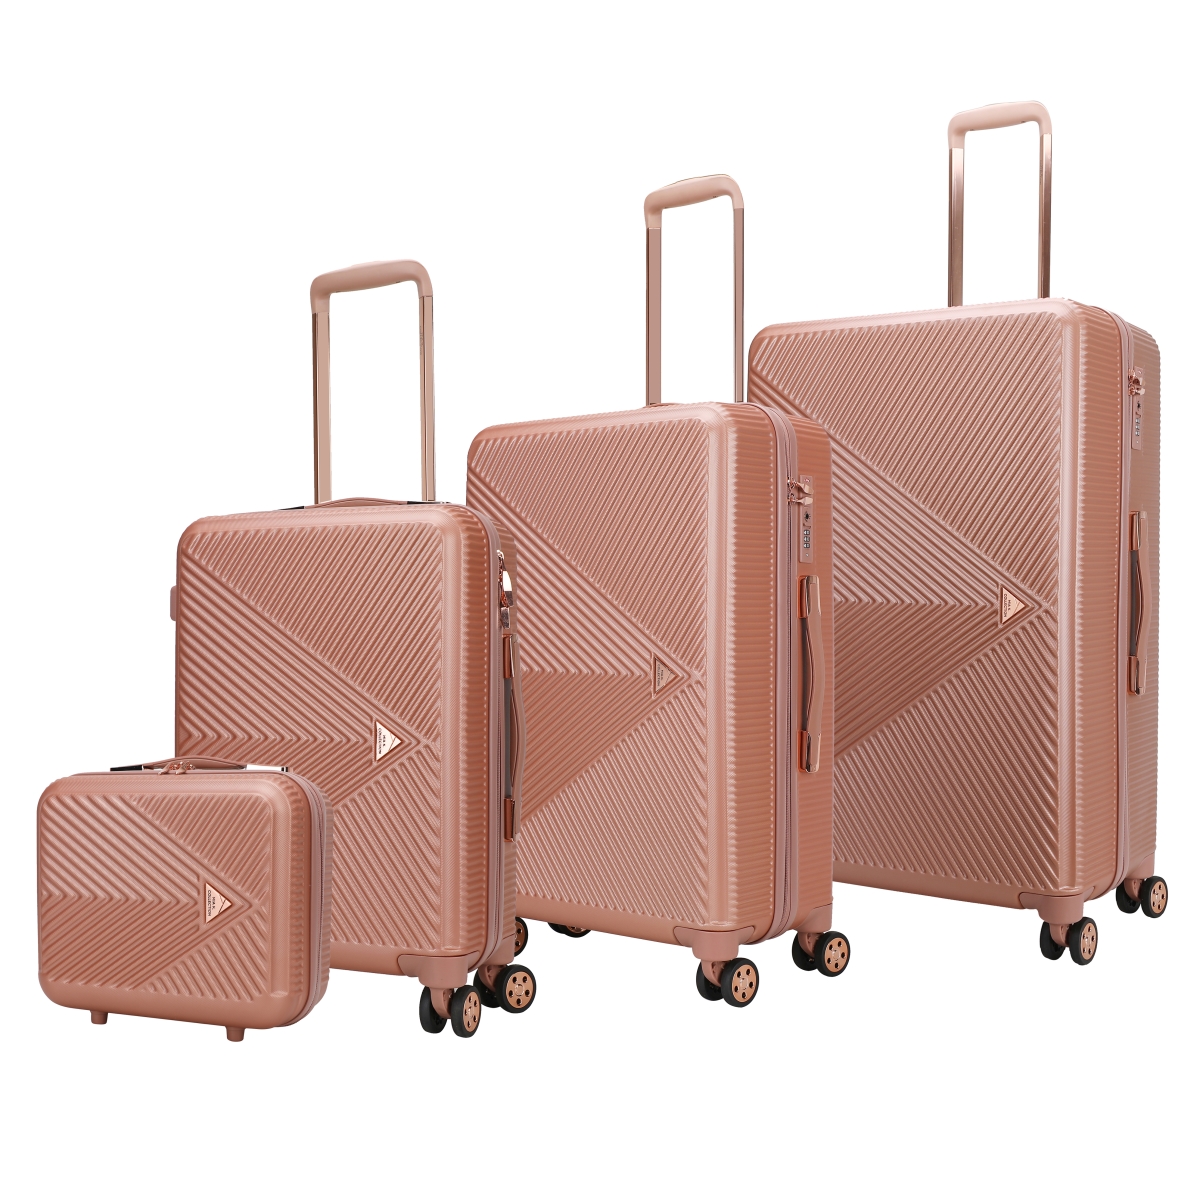 Picture of MKF Collection by Mia K. MKF-F204RGL-4 Felicity Luggage Set by Mia K- 4-piece set